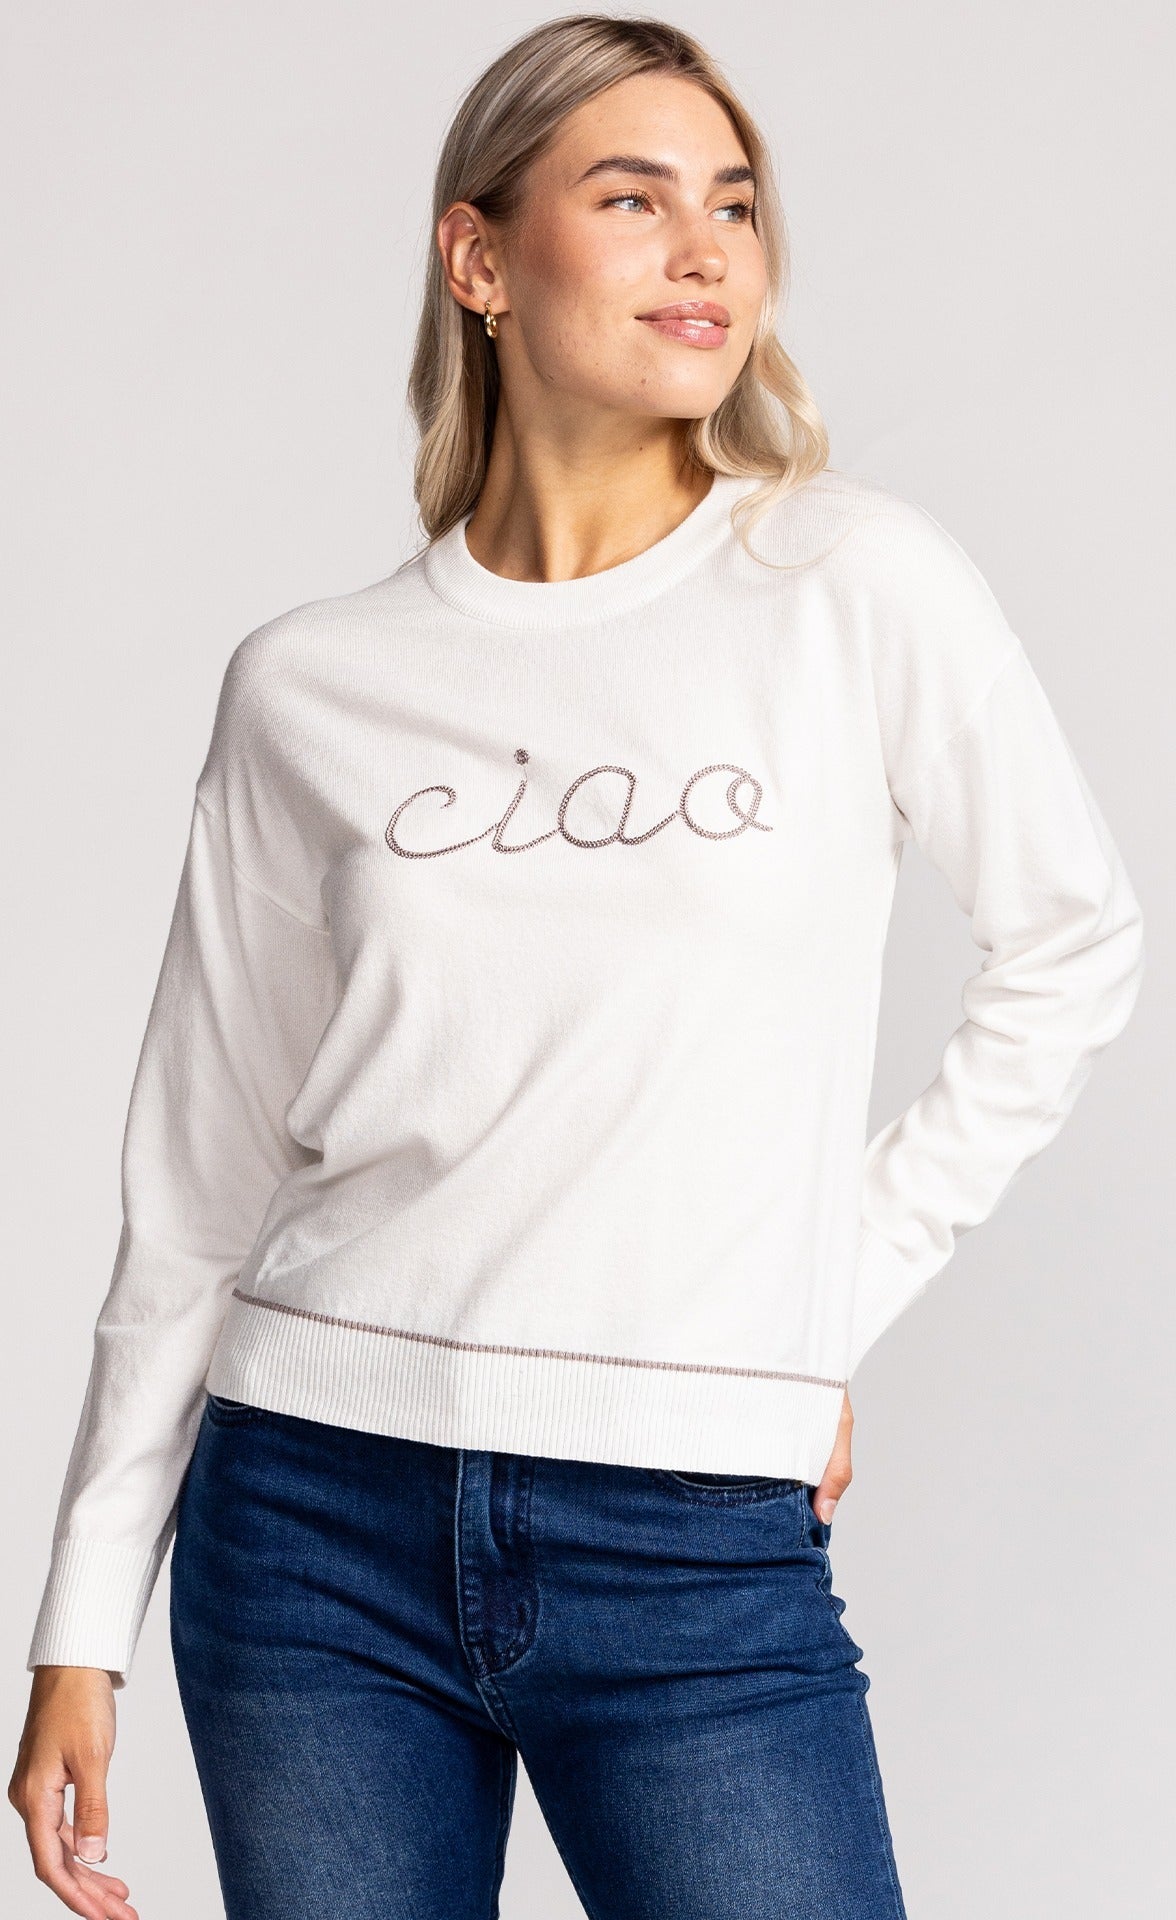 Ciao Sweater White - Pink Martini Collection